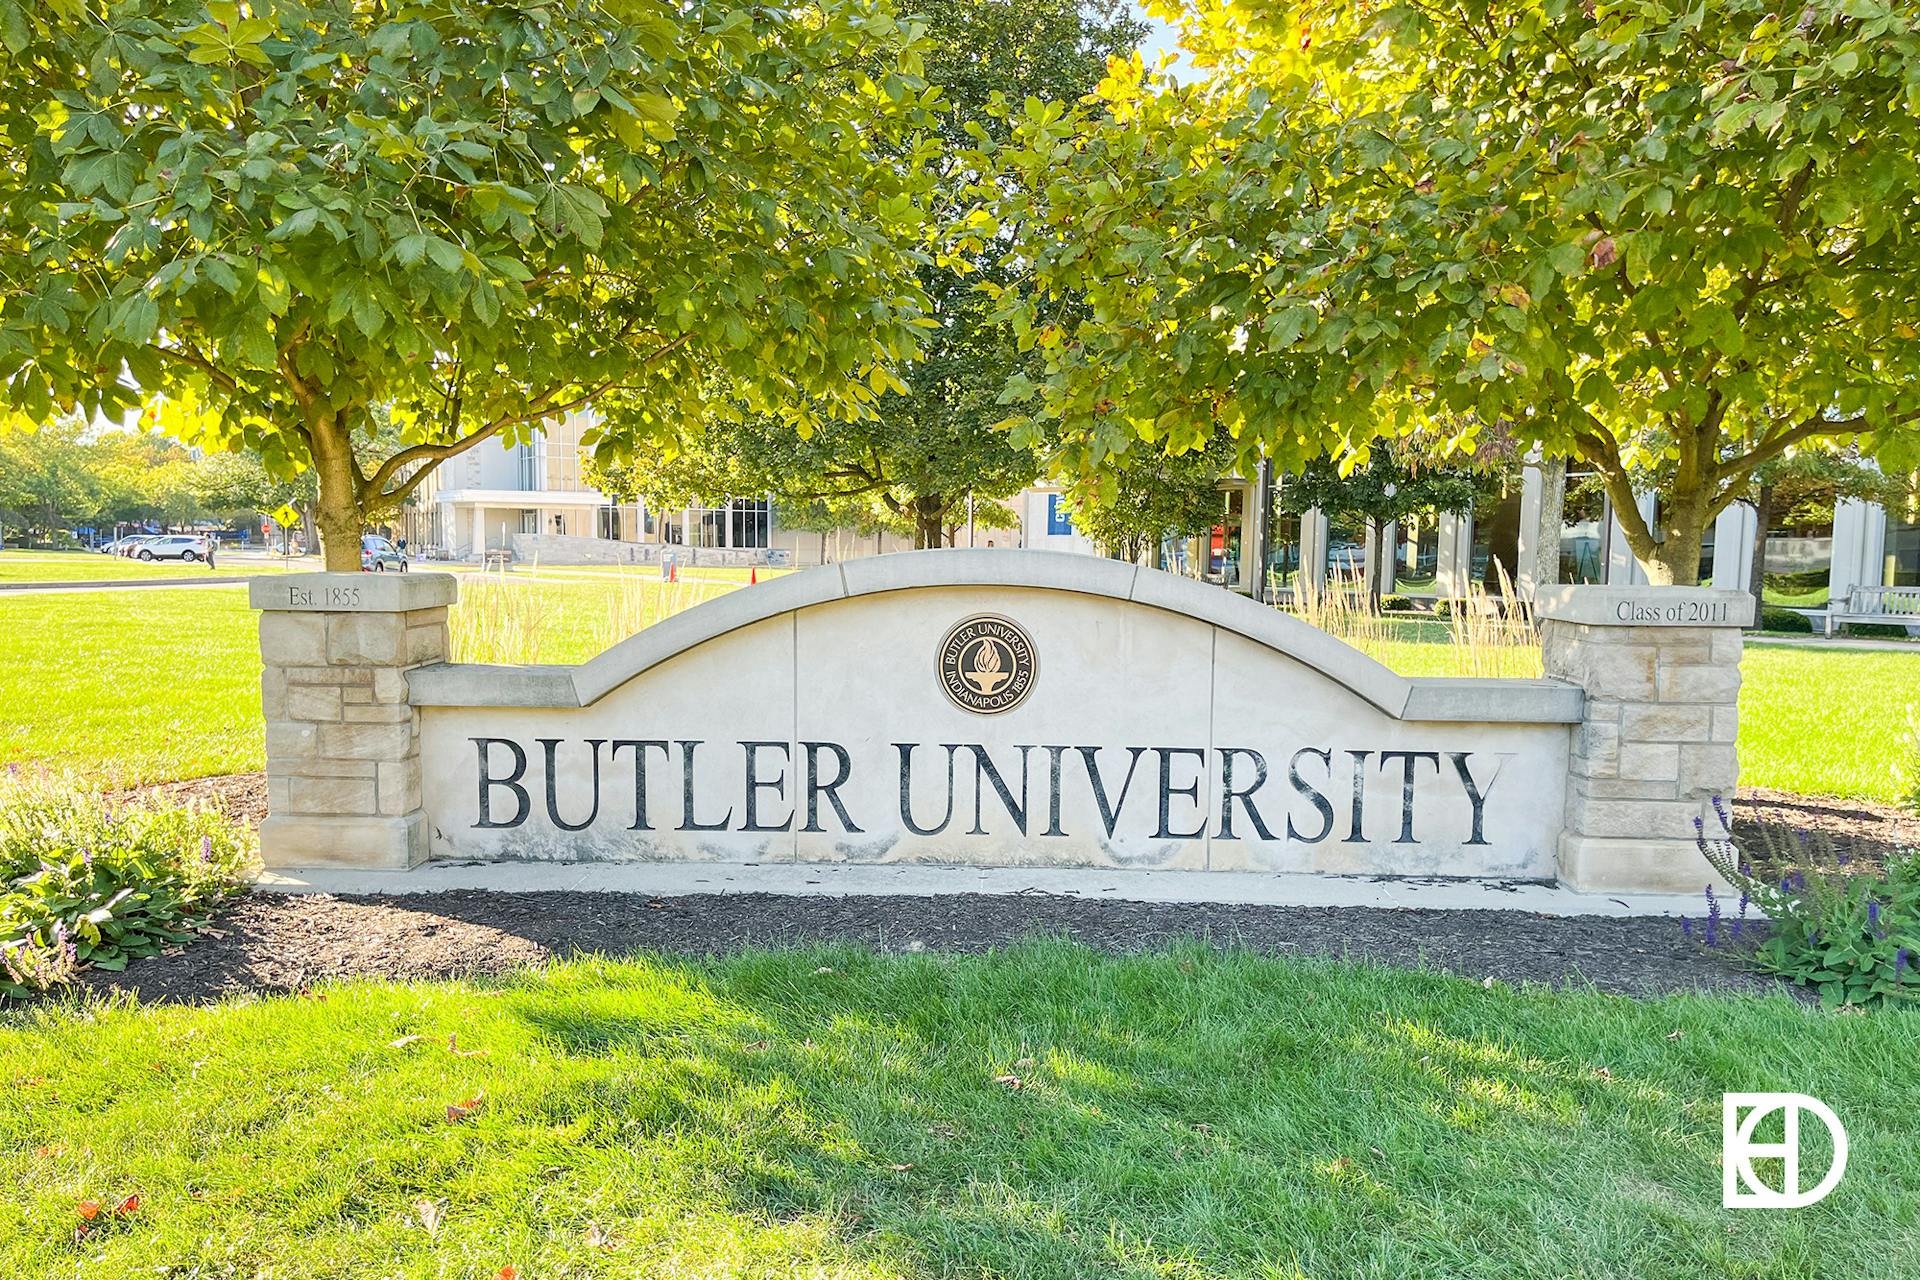 Photo of sign reading "Butler Univeristy"